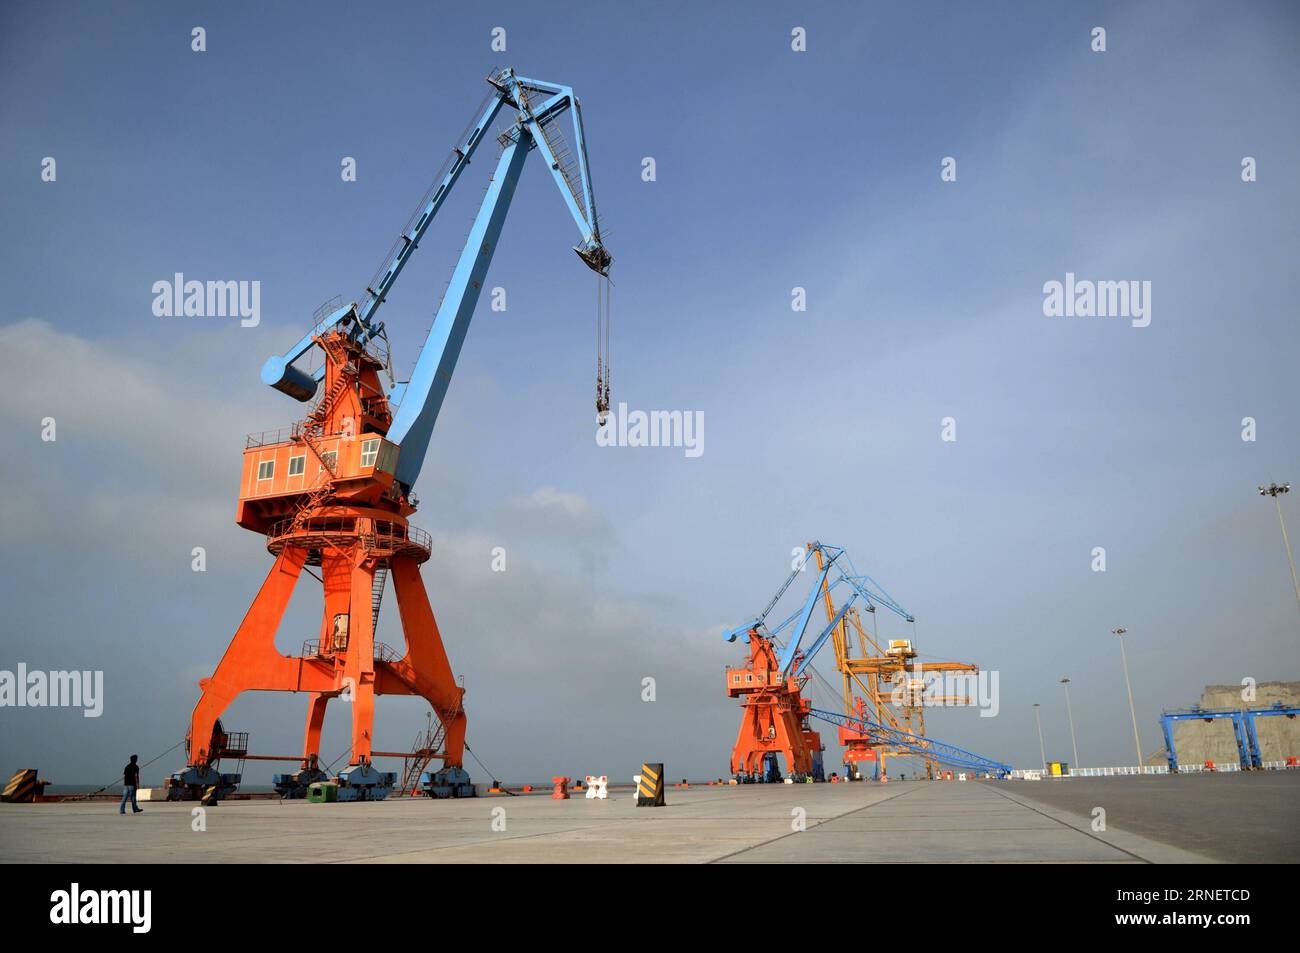 (160704) -- GWADAR, July 4, 2016 -- Photo taken on July 2, 2016, shows a view of Gwadar Port in southwest Pakistan. Gwadar Port is a warm-water, deep-sea port situated on the Arabian Sea in Balochistan province of Pakistan. China and Pakistan agreed to build China-Pakistan Economic Corridor(CPEC), a major and pilot project under the Belt and Road Initiative, to connect the Pakistani Gwadar port with Kashgar city in China s Xinjiang Uygur Autonomous Region. ) PAKISTAN-GWADAR PORT-BELT AND ROAD INITIATIVE AhmadxKamal PUBLICATIONxNOTxINxCHN   160704 Gwadar July 4 2016 Photo Taken ON July 2 2016 S Stock Photo